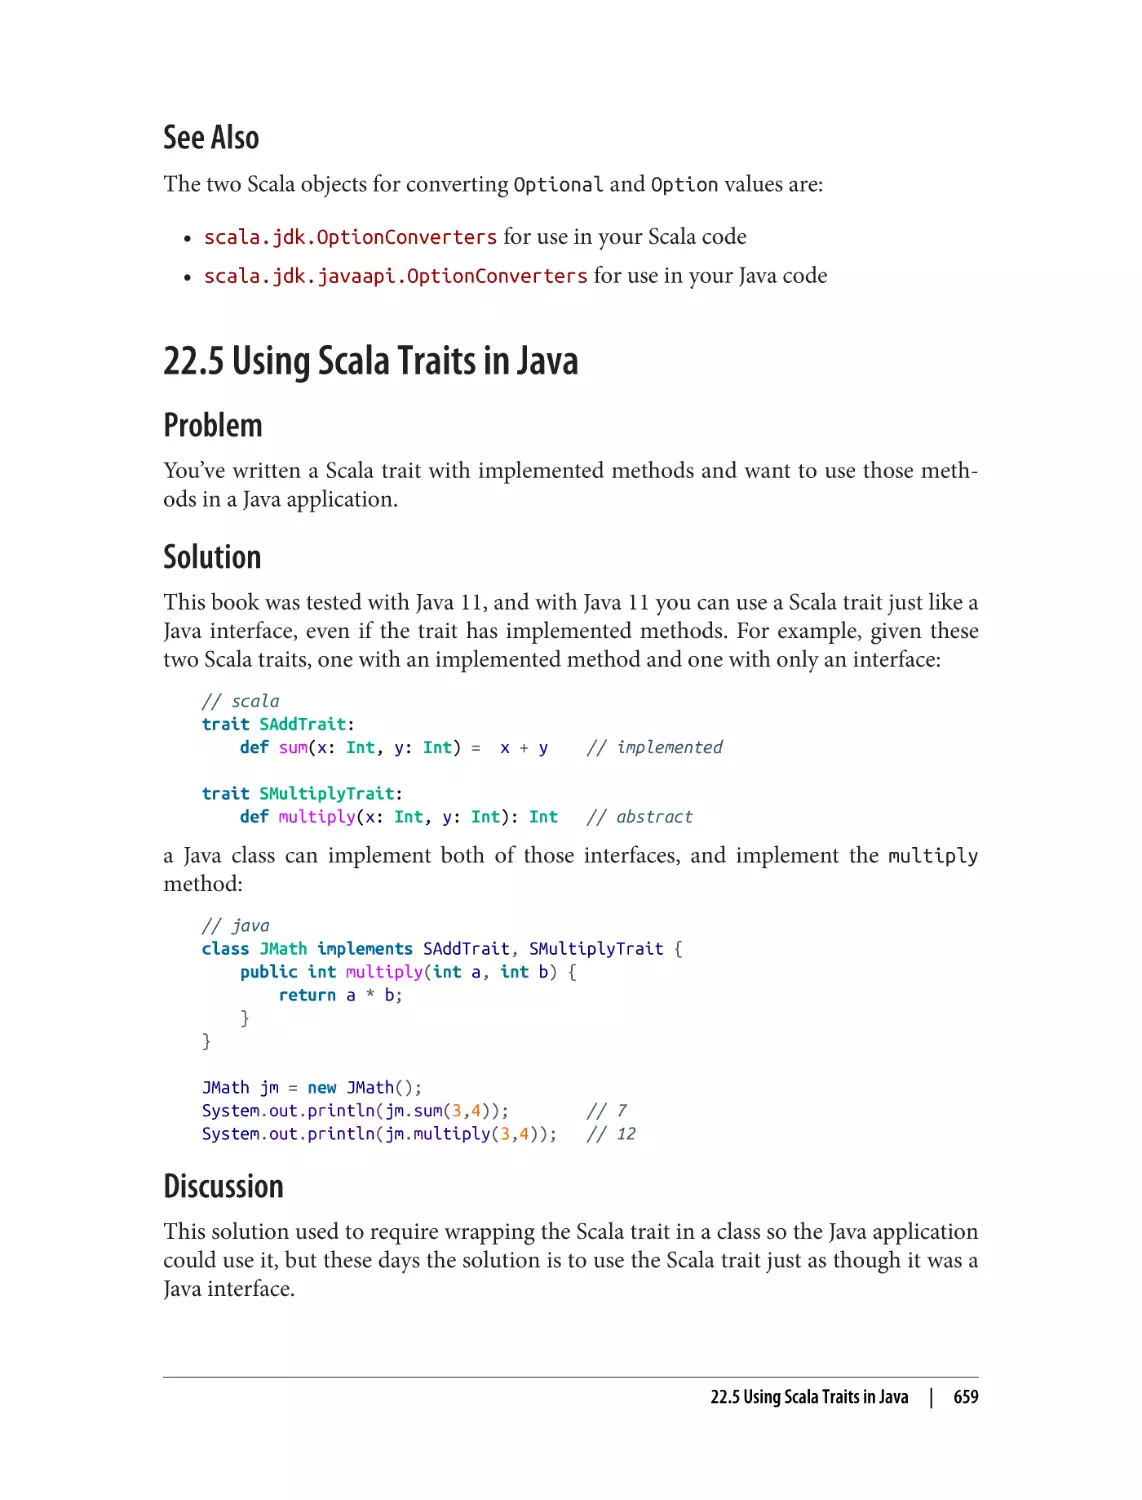 See Also
22.5 Using Scala Traits in Java
Problem
Solution
Discussion